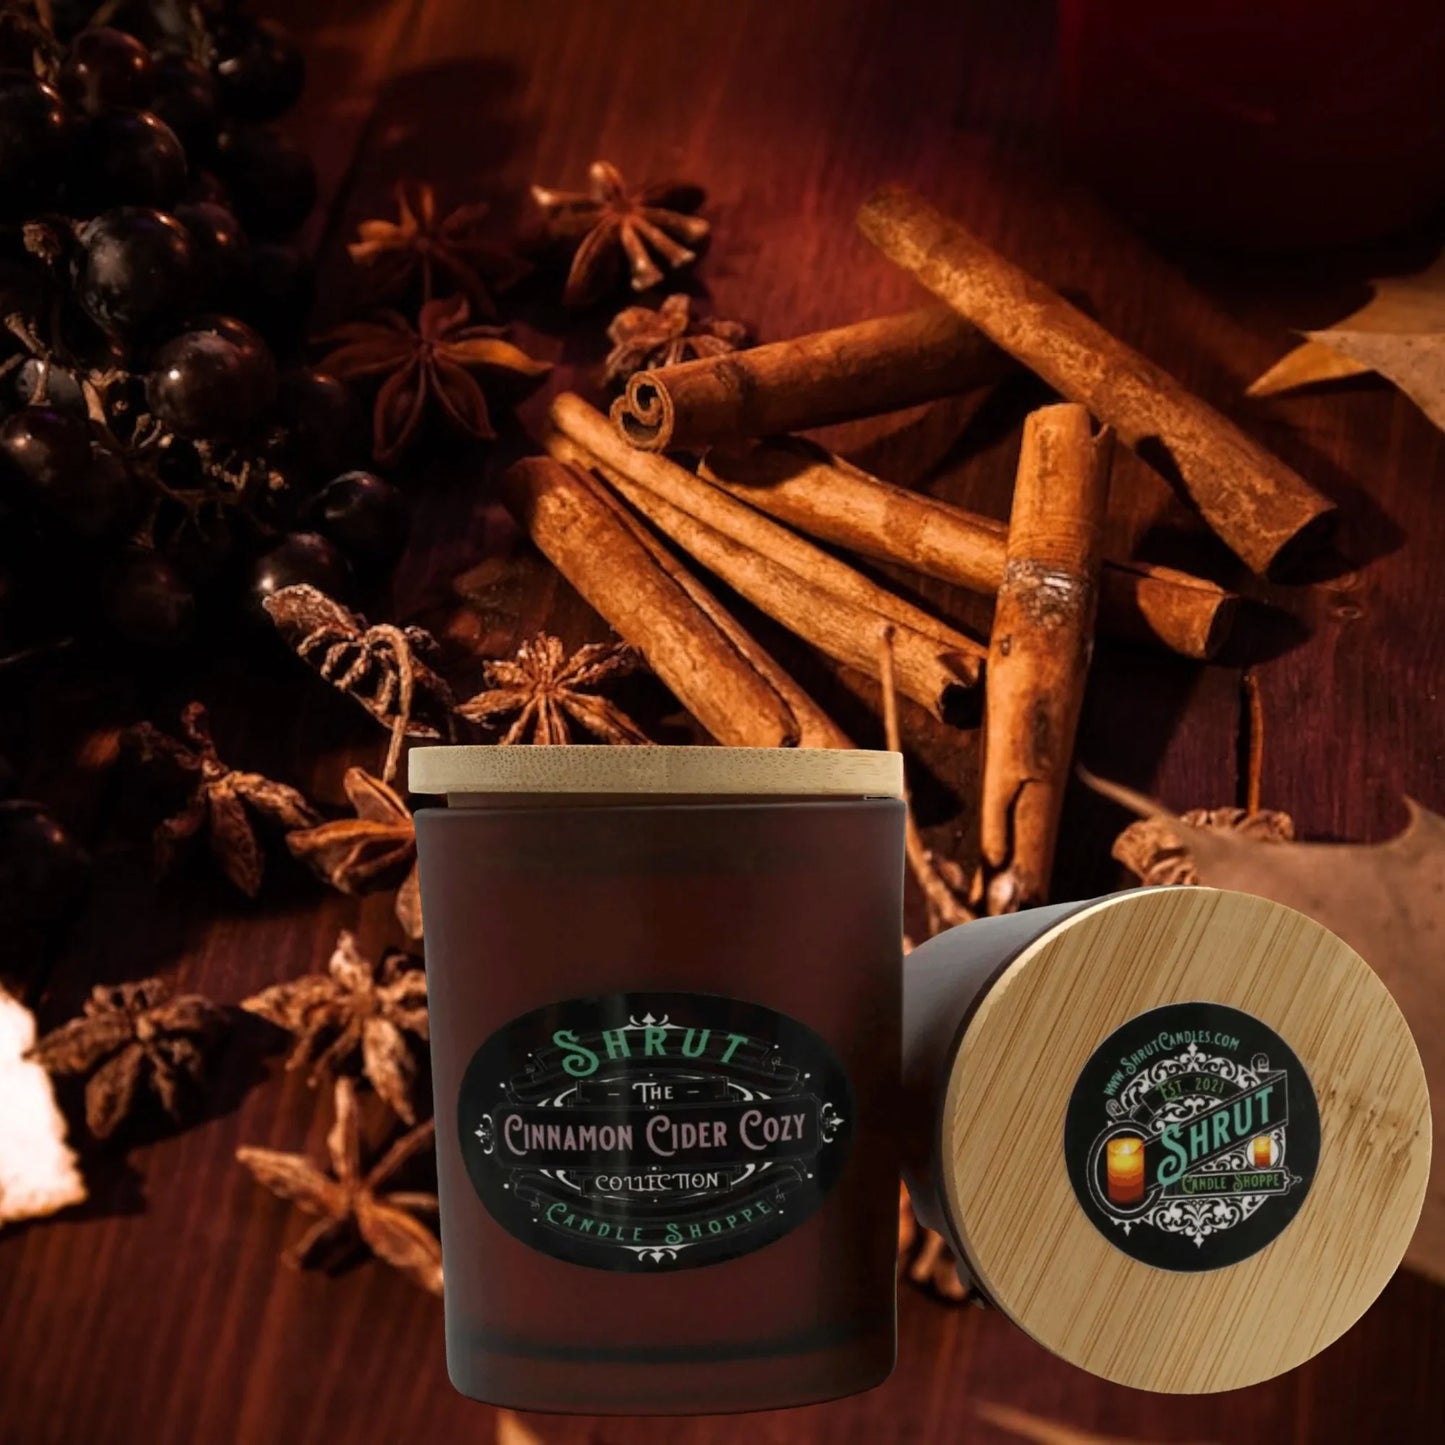 Cinnamon Cider Cozy Homemade, Hand-Poured Scented Candle